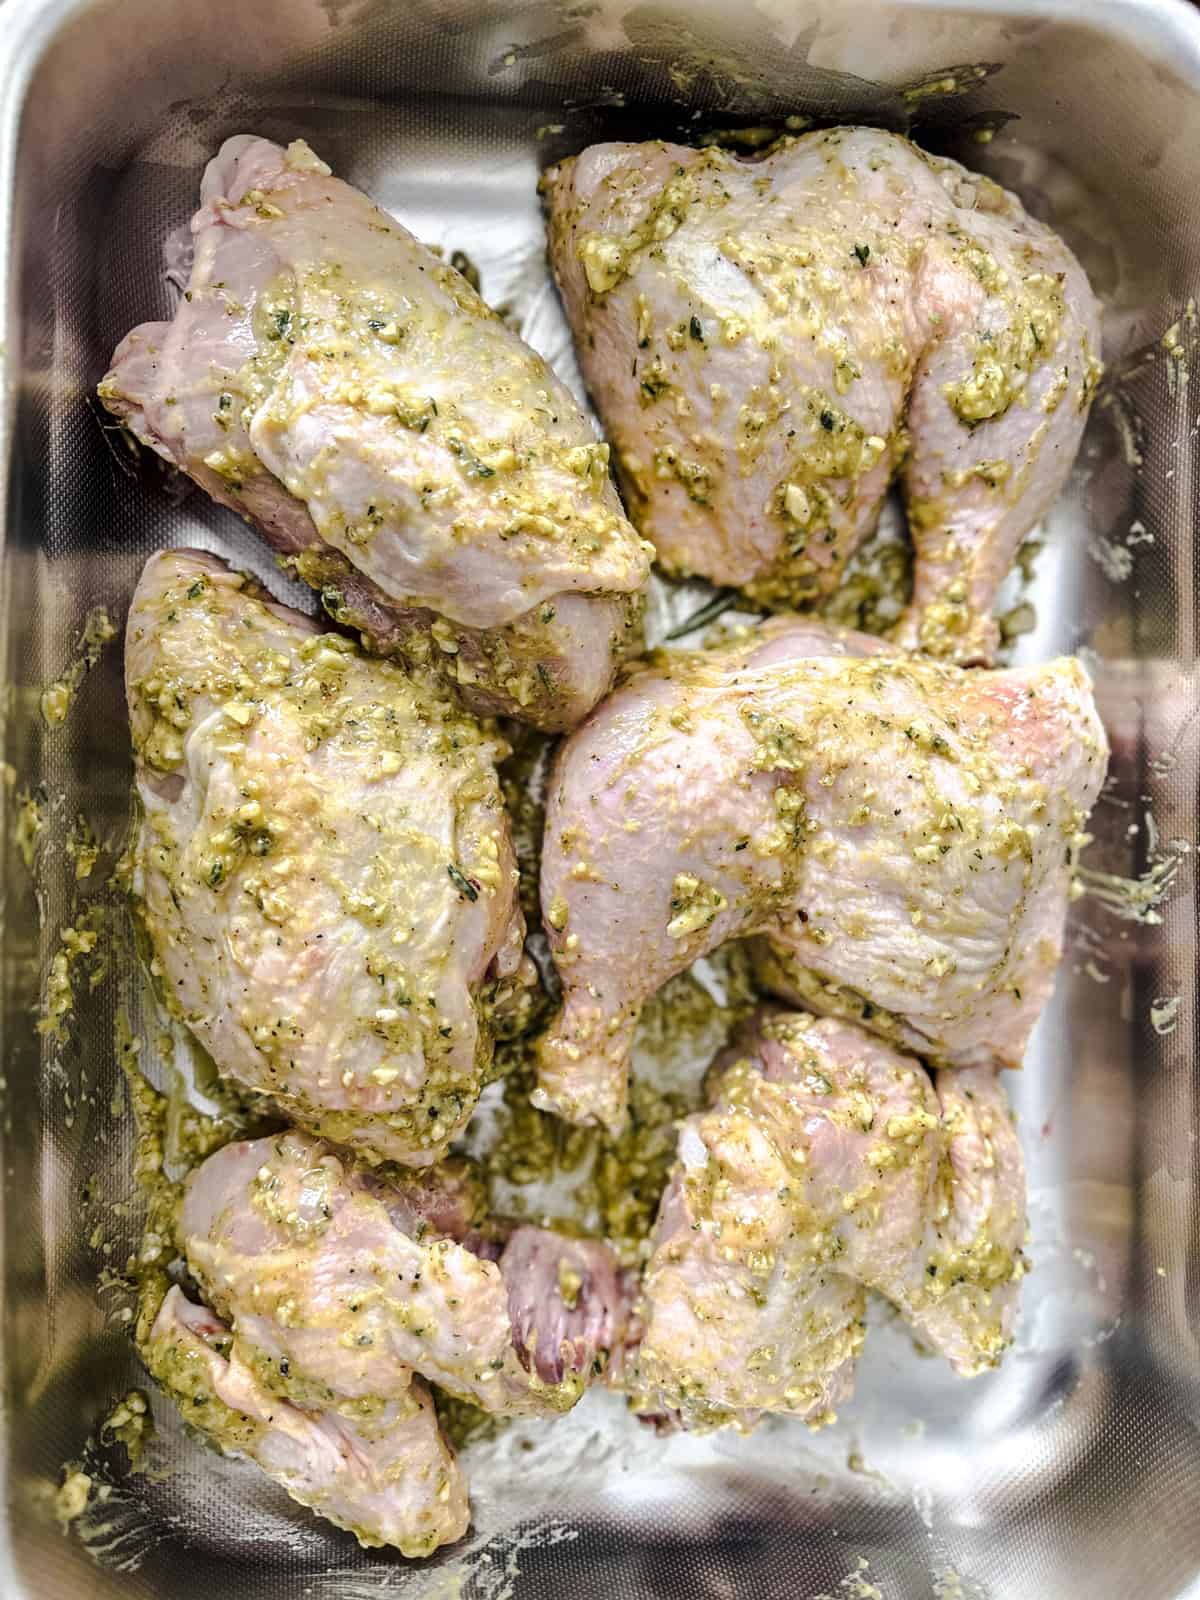 Chicken pieces rubbed with marinade in a baking pan.